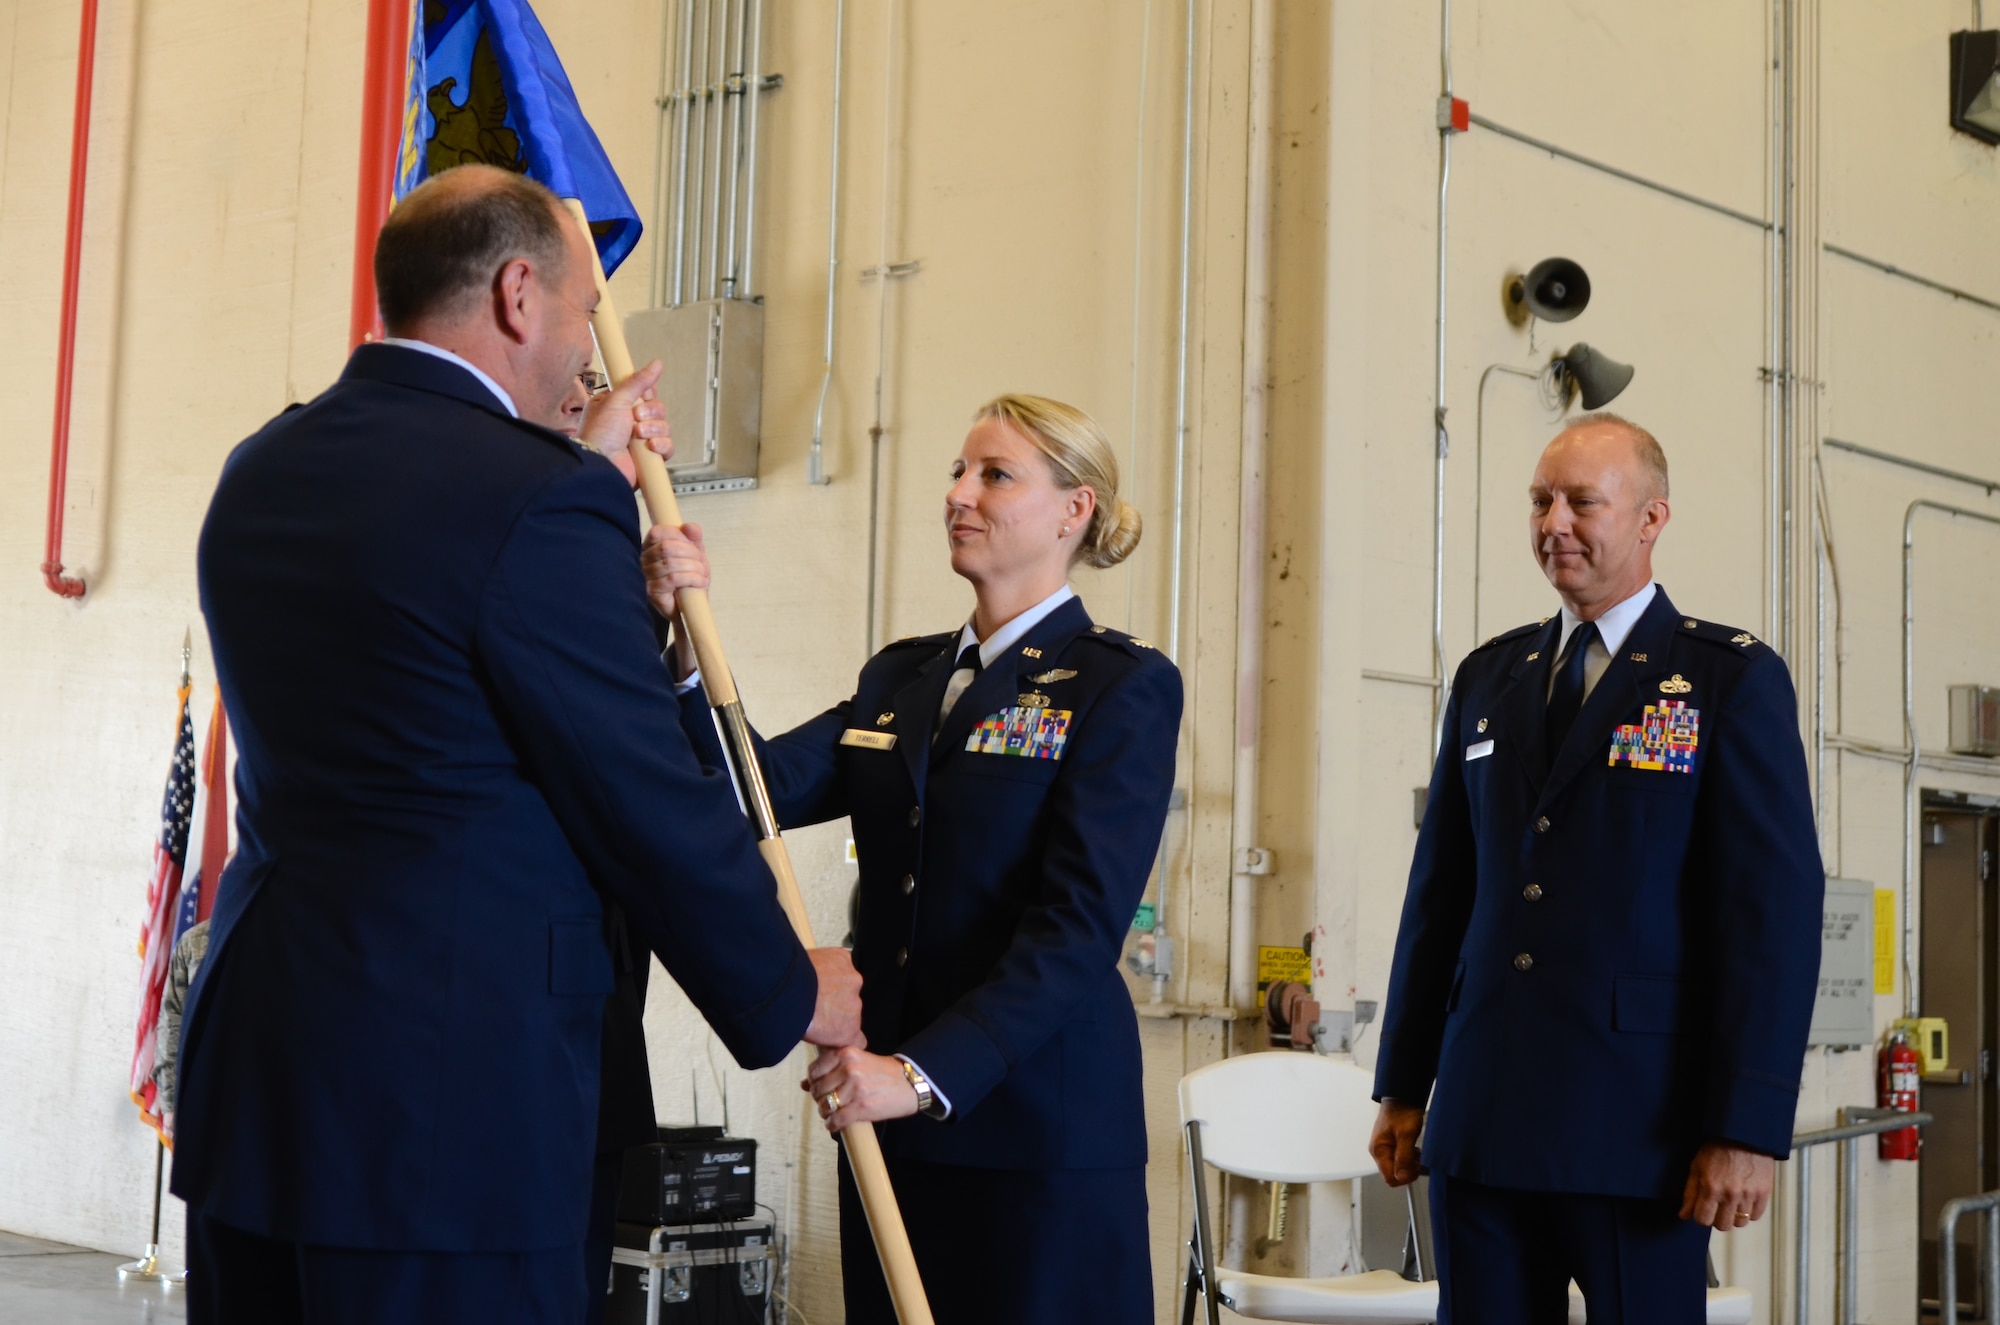 U.S. Air Force Lt. Col. Bryony A. Terrell (center) assumes command of the 139th Mission Support Group during a change of command ceremony at Rosecrans National Guard Base, St. Joseph, Mo., June 4, 2016. The outgoing group commander, Col. Gordon Meyer (right), has been selected to attend the U.S. Air Force Air War College at Maxwell Air Force Base, Ala. (U.S. Air National Guard photo by Tech. Sgt. Michael Crane/released)